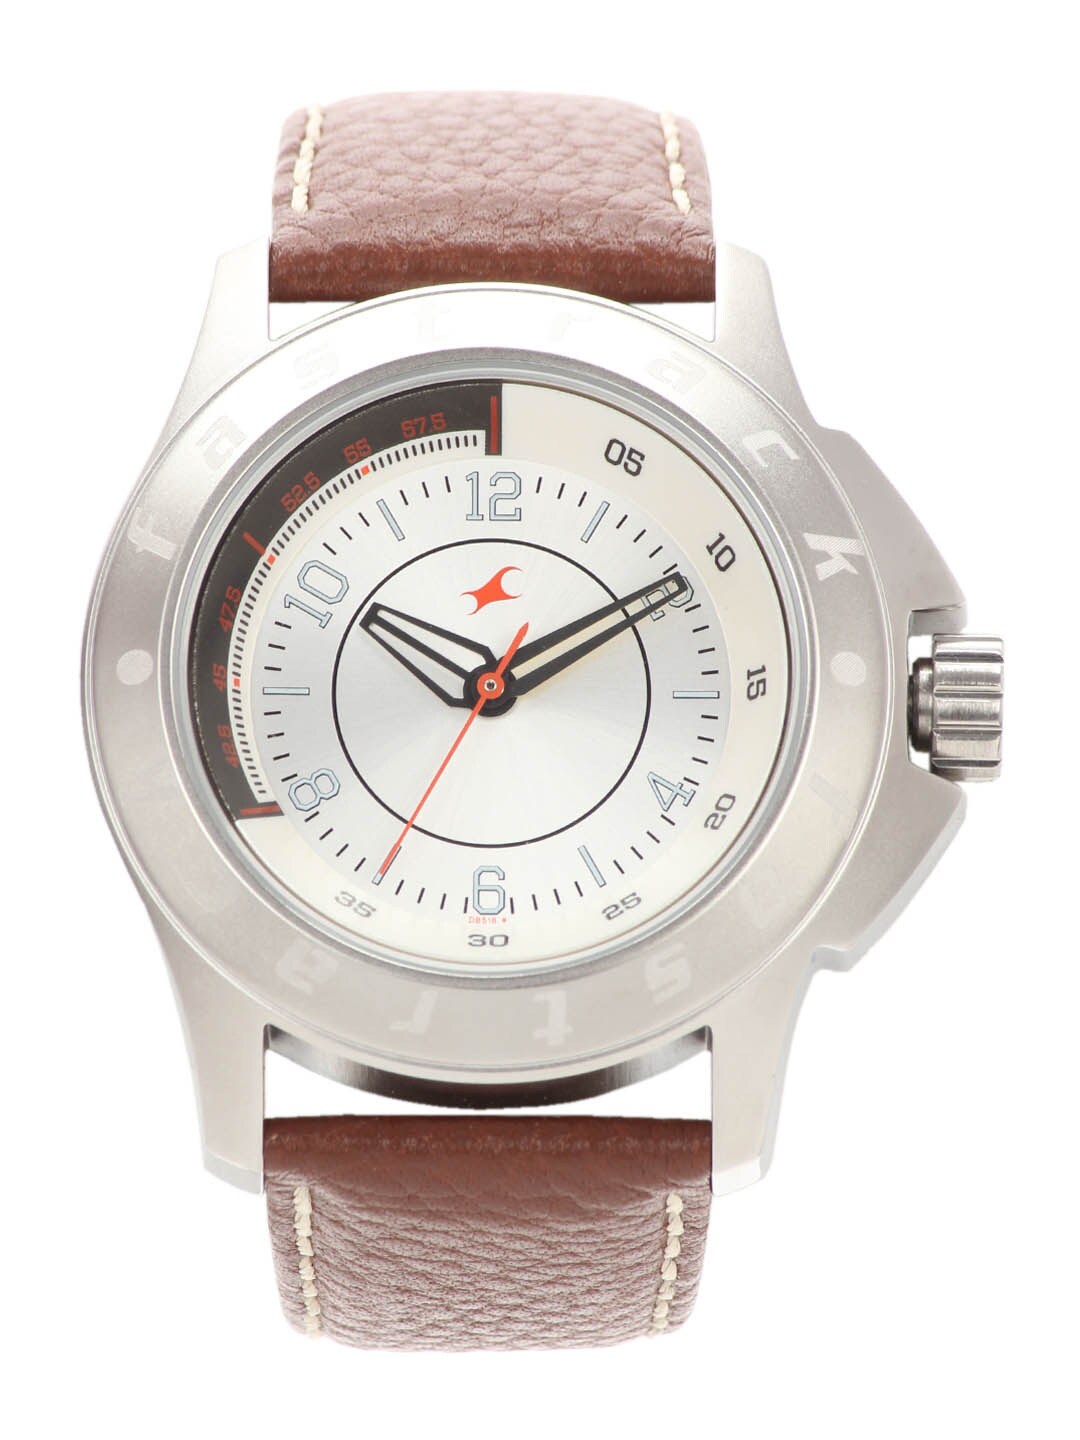 Fastrack Men Silver Dial Watch